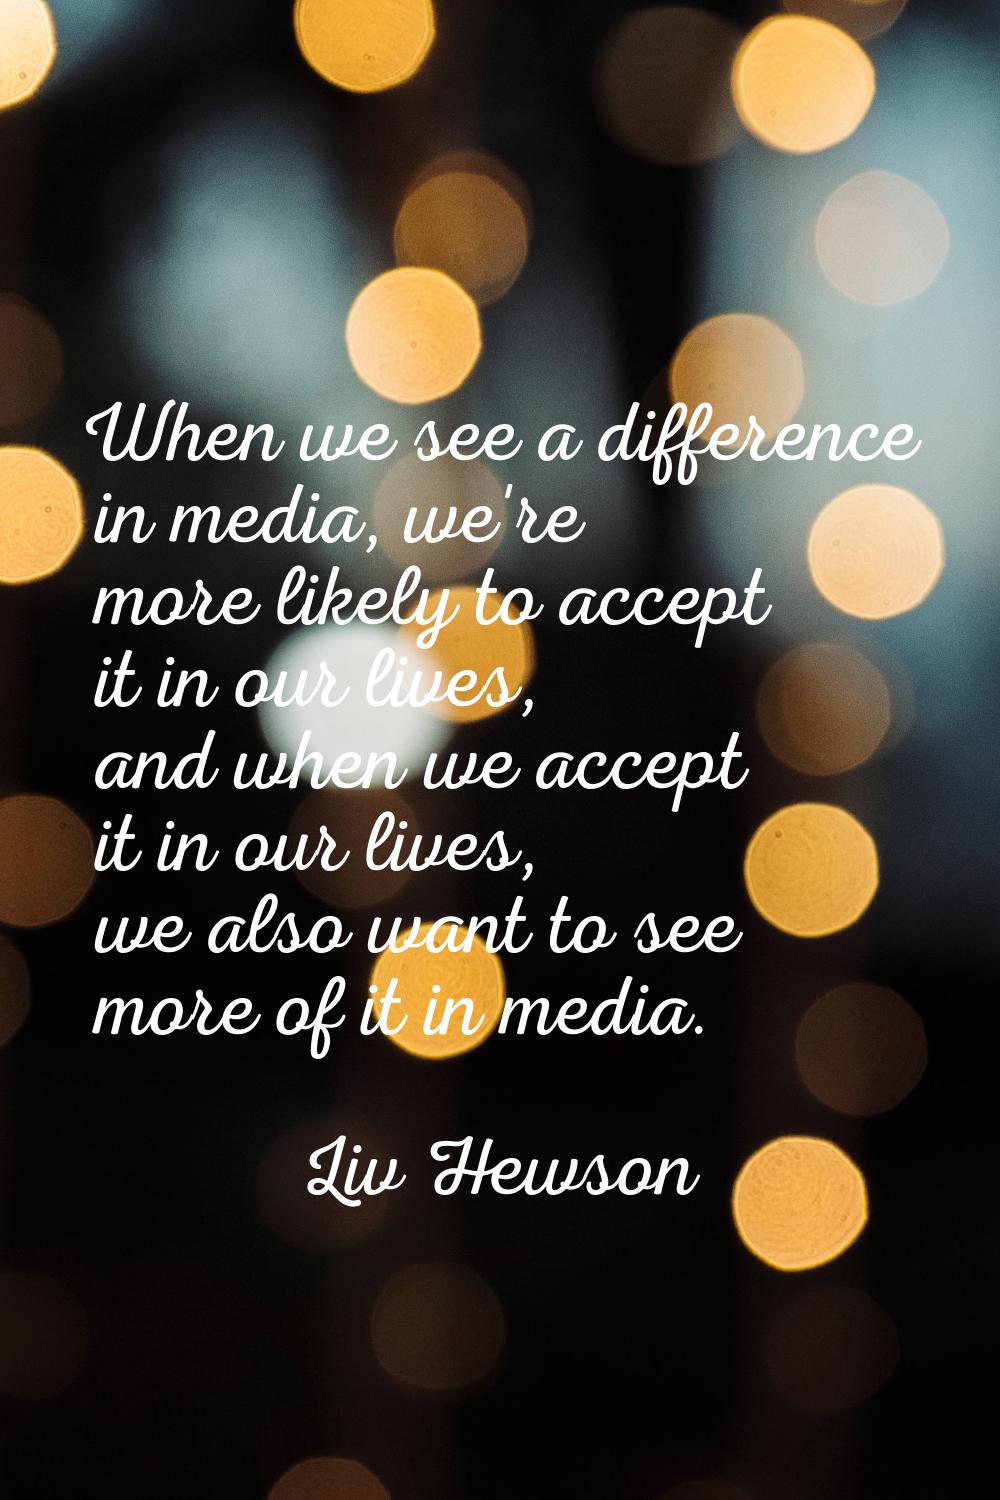 When we see a difference in media, we're more likely to accept it in our lives, and when we accept 